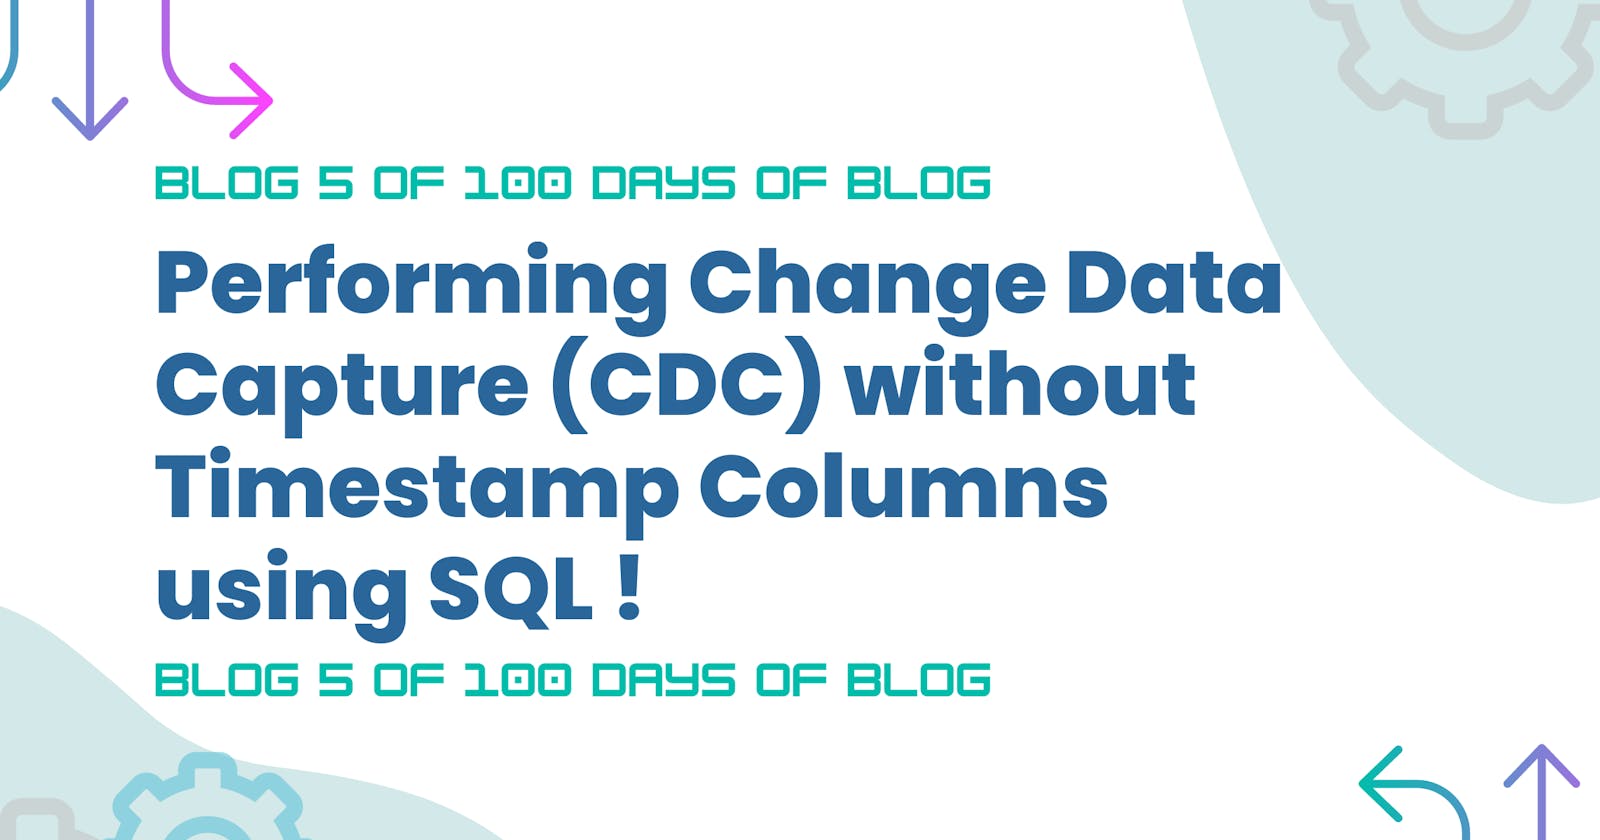 Performing Change Data Capture (CDC) without Timestamp Columns using SQL